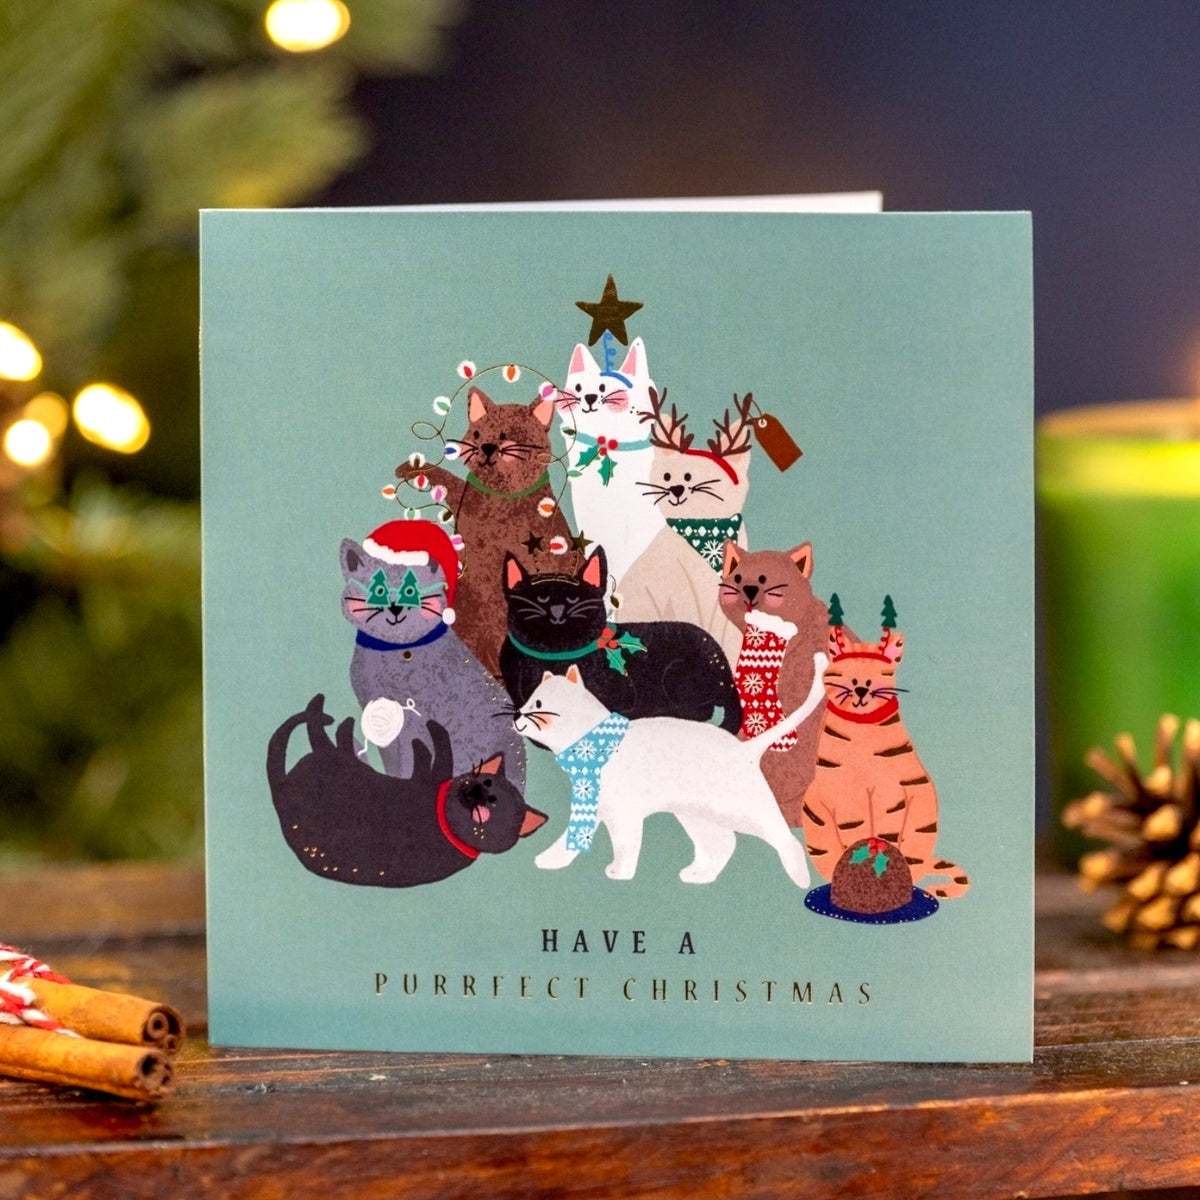 Crisis Have A Purrfect Christmas Cards - Pack of 8